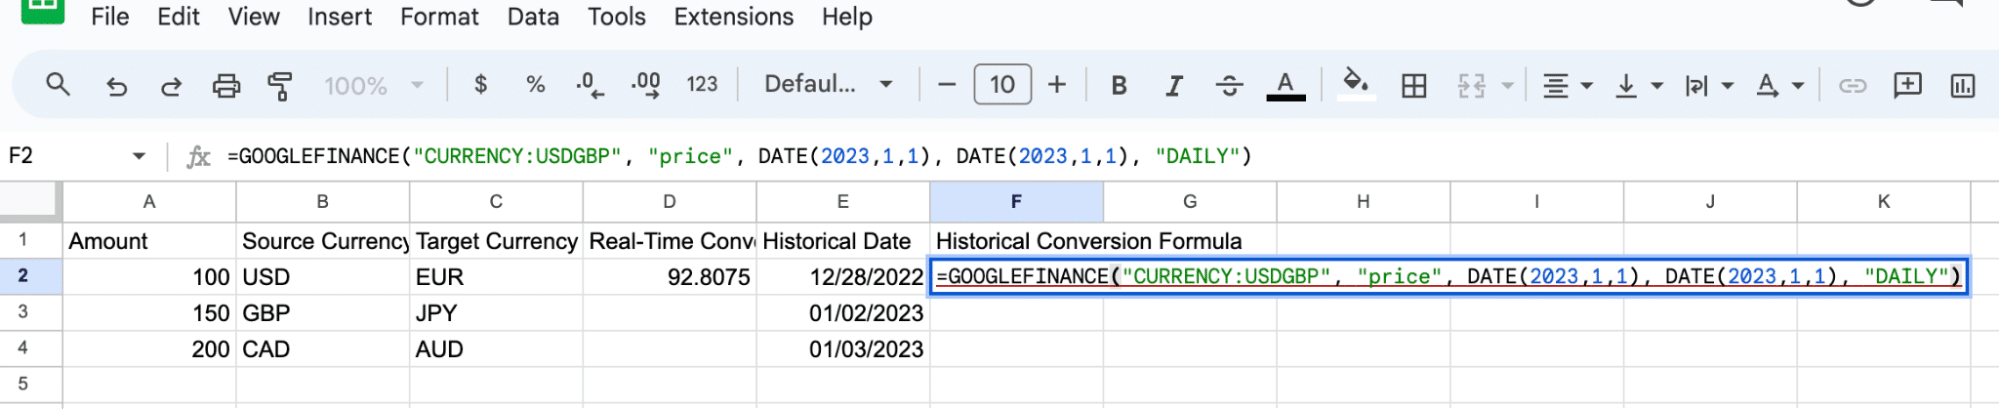 Historical currency conversion from USD to GBP on 01/01/2023 in Google Sheets using GOOGLEFINANCE.